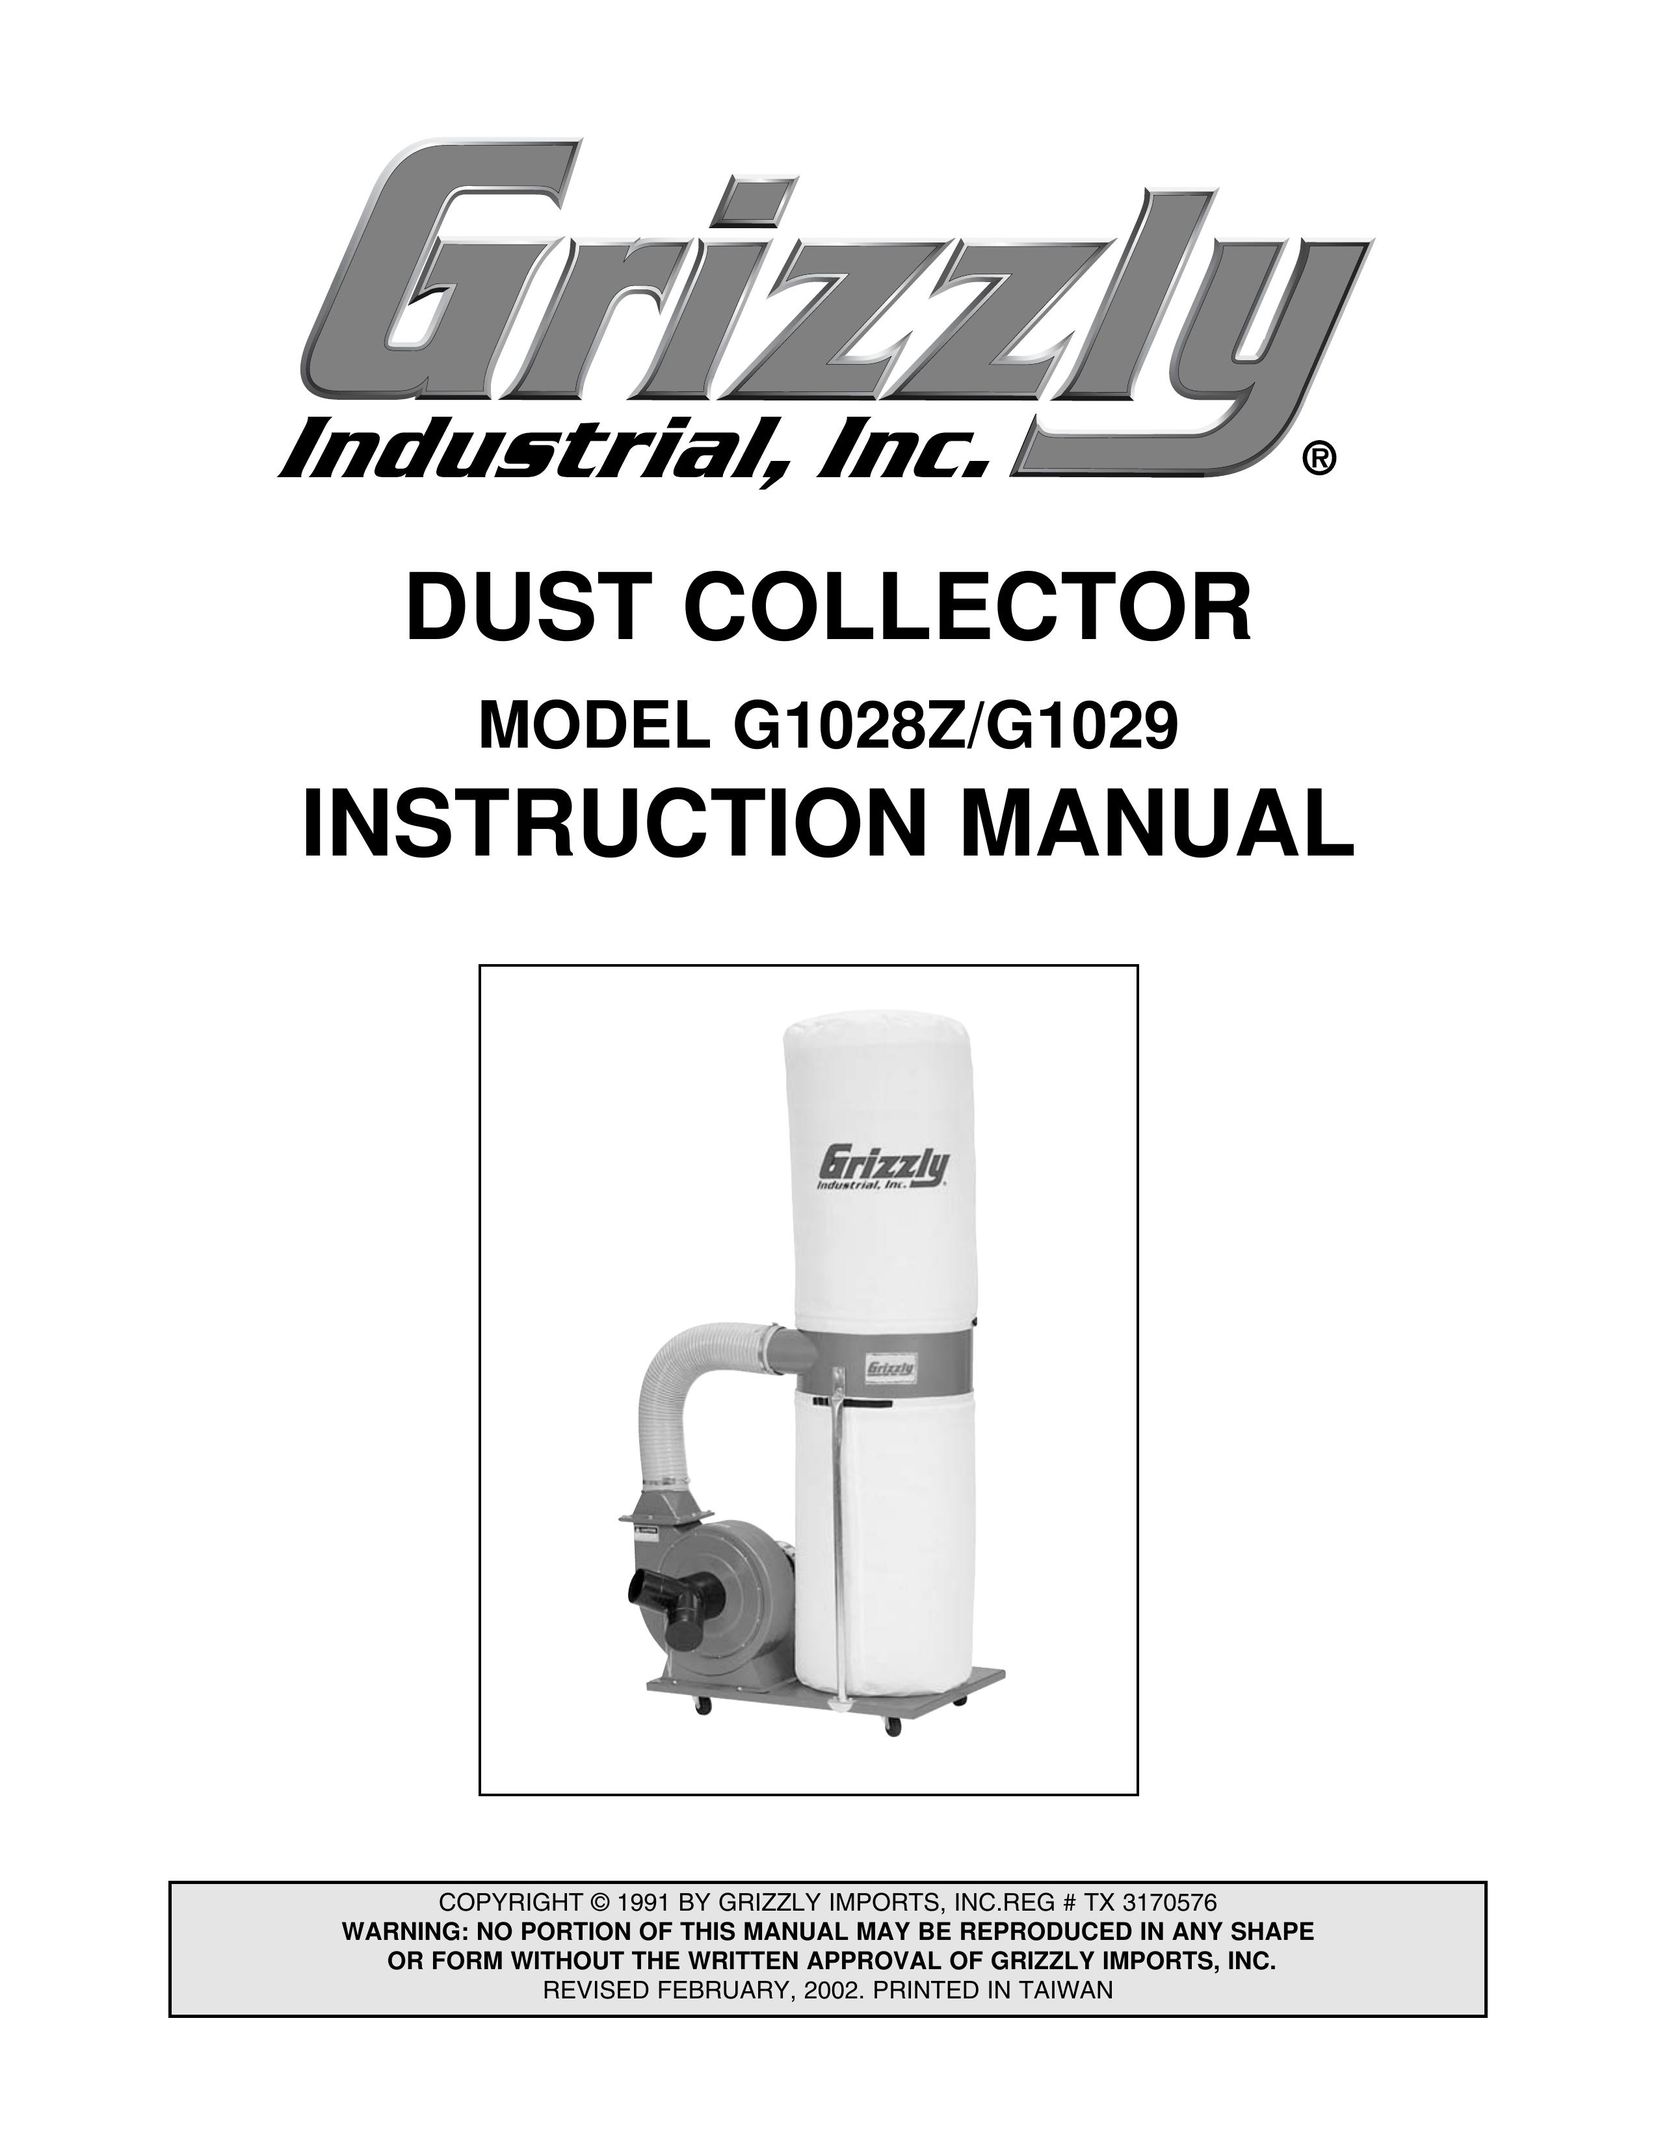 Grizzly G1028Z Dust Collector User Manual